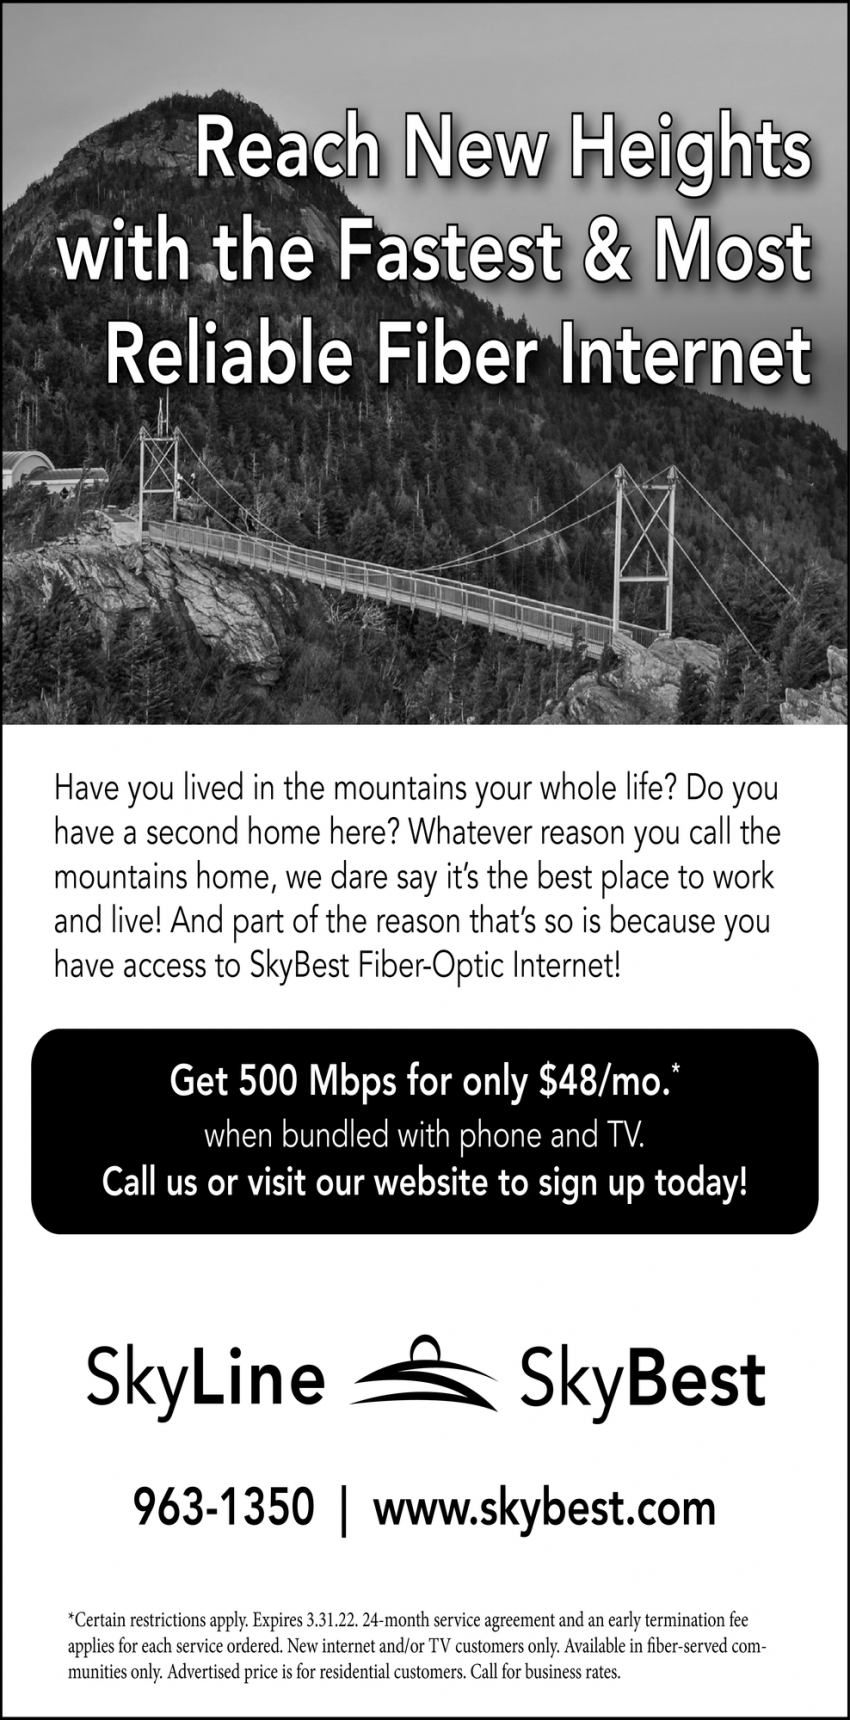 Reach New Heights with the Fastest & Most Reliable Fiber Internet